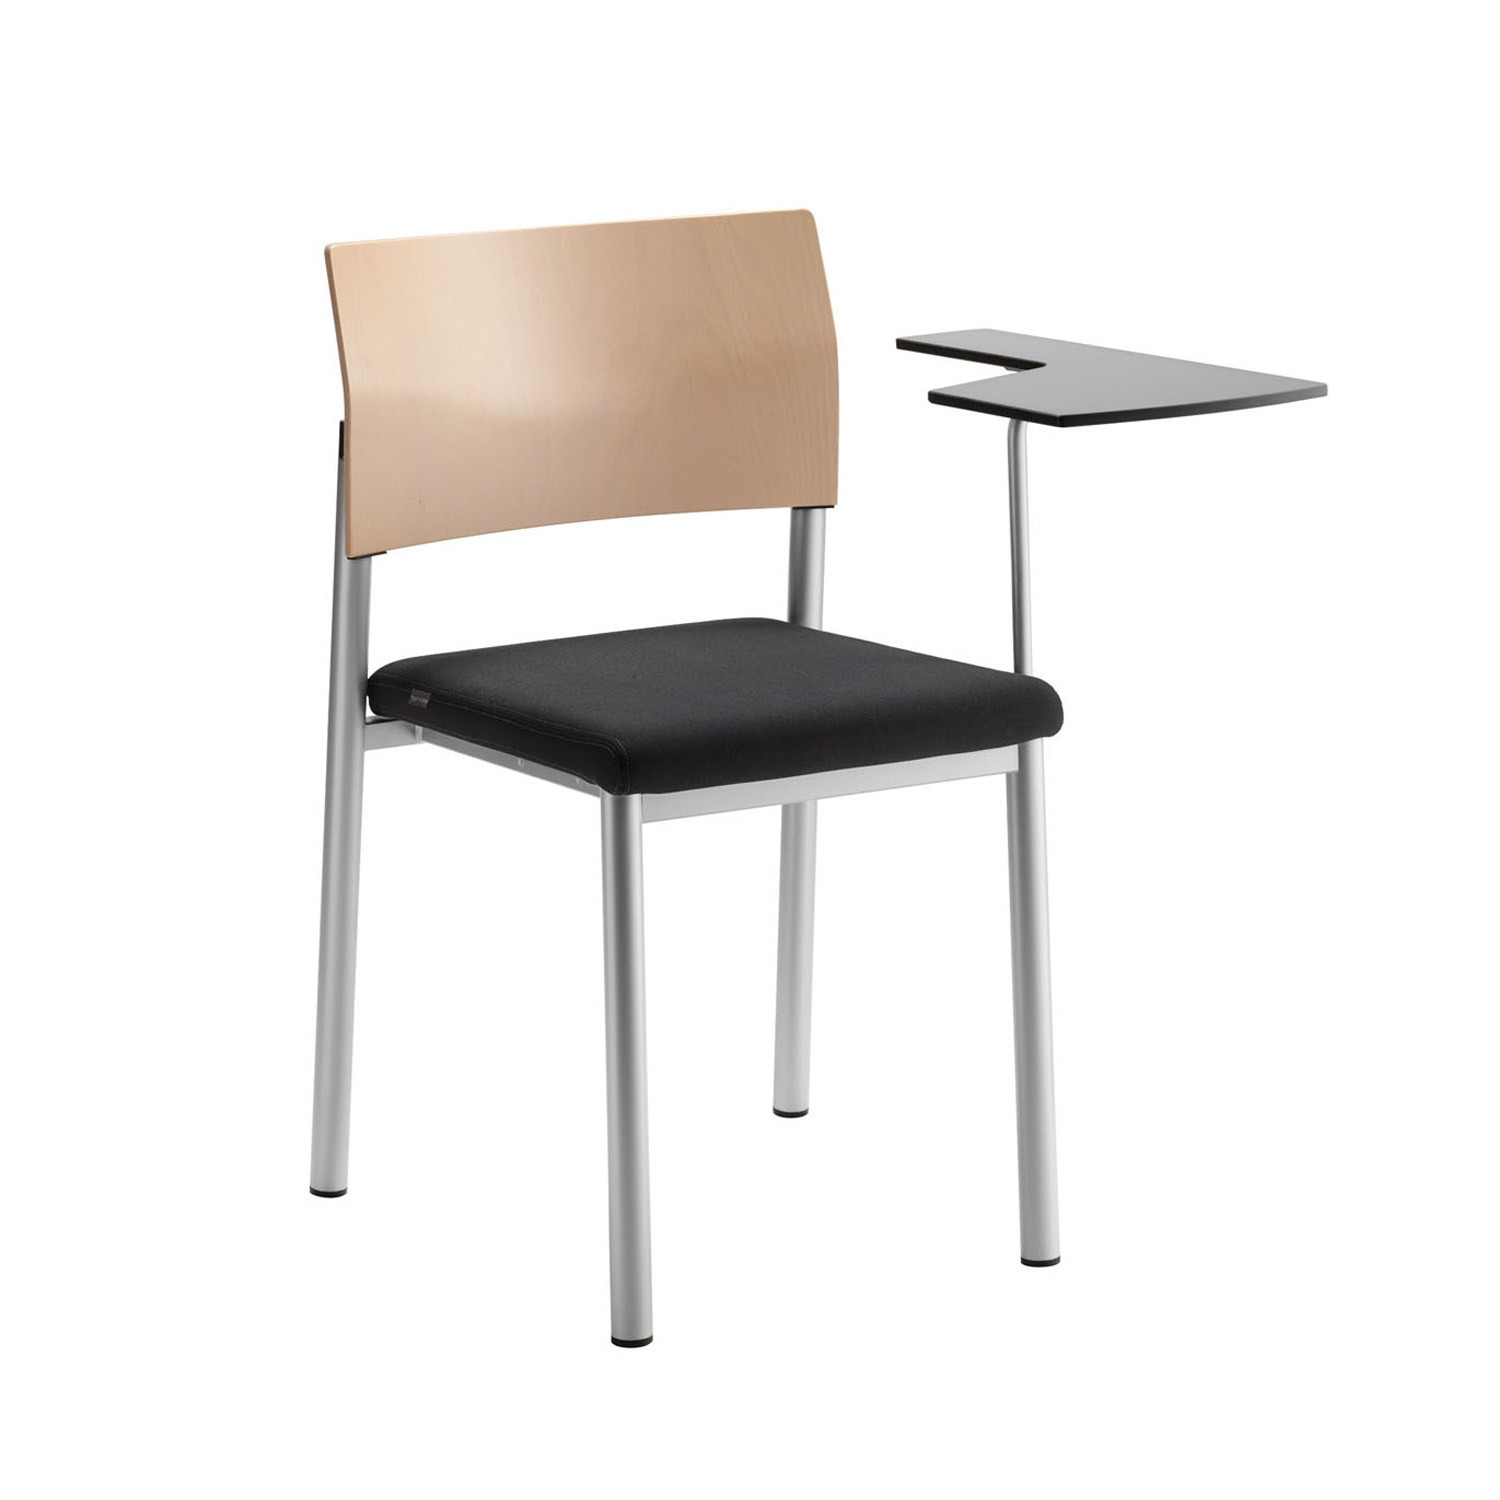 Aluform Chair with Panel